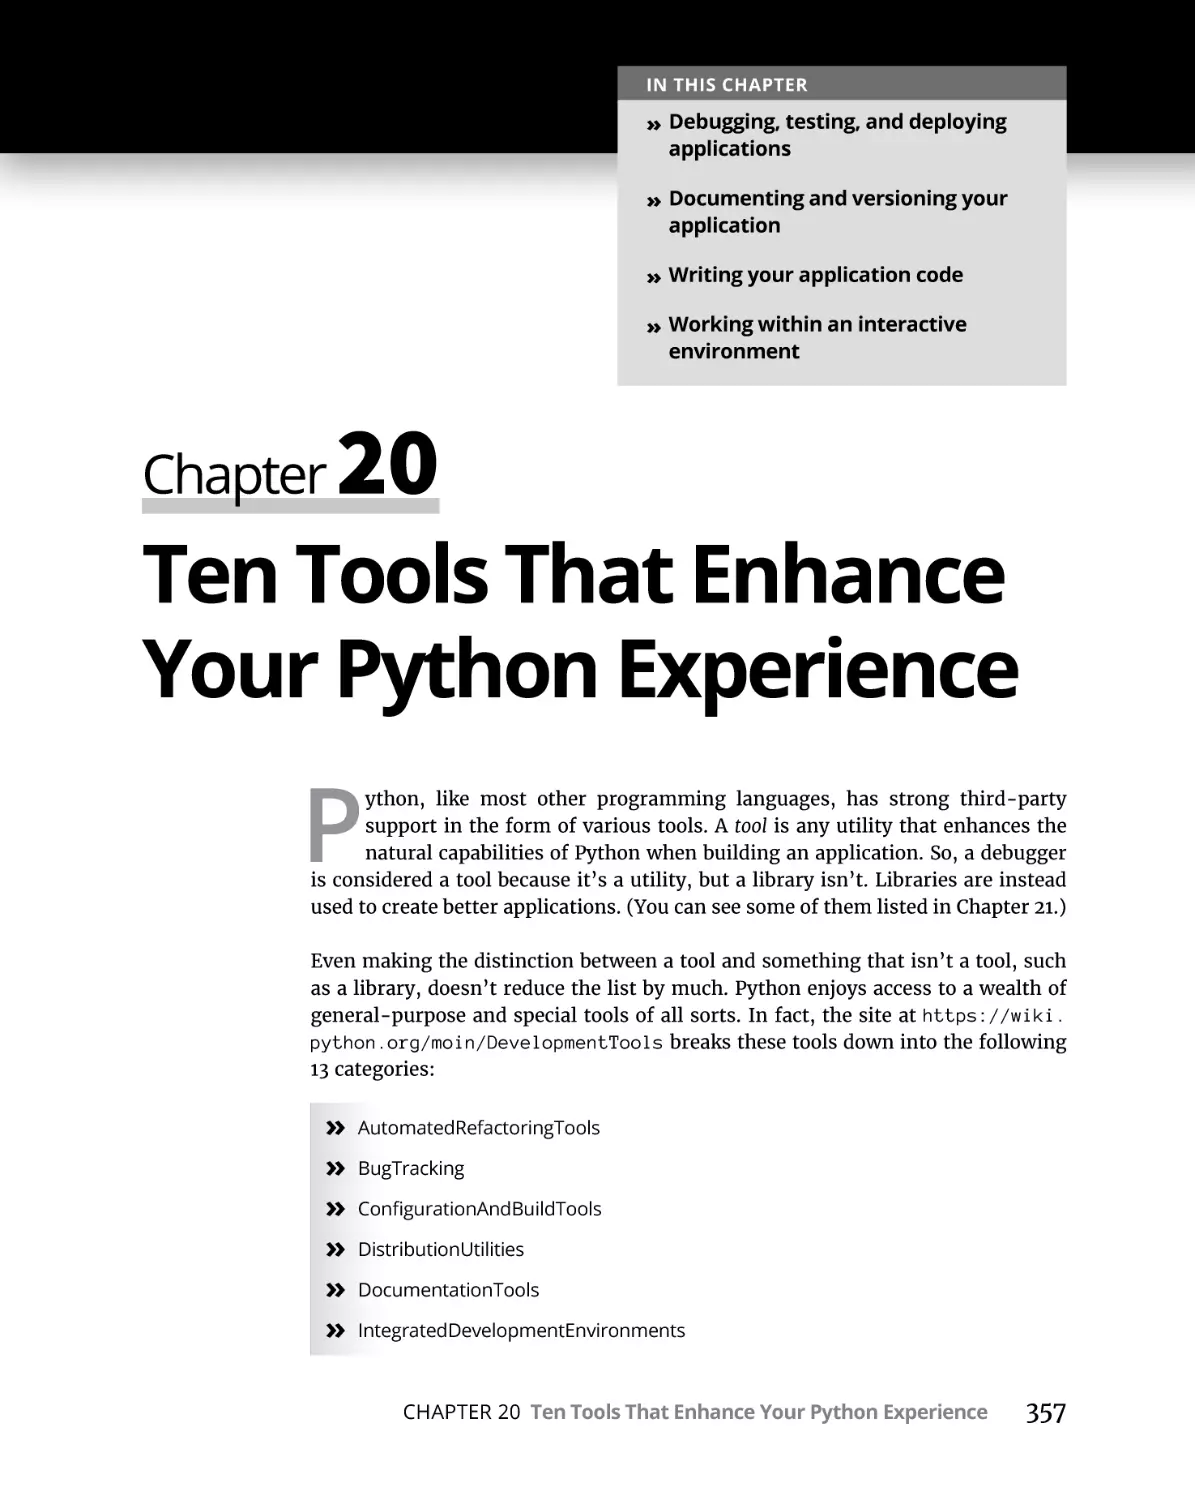 Chapter 20 Ten Tools That Enhance Your Python Experience